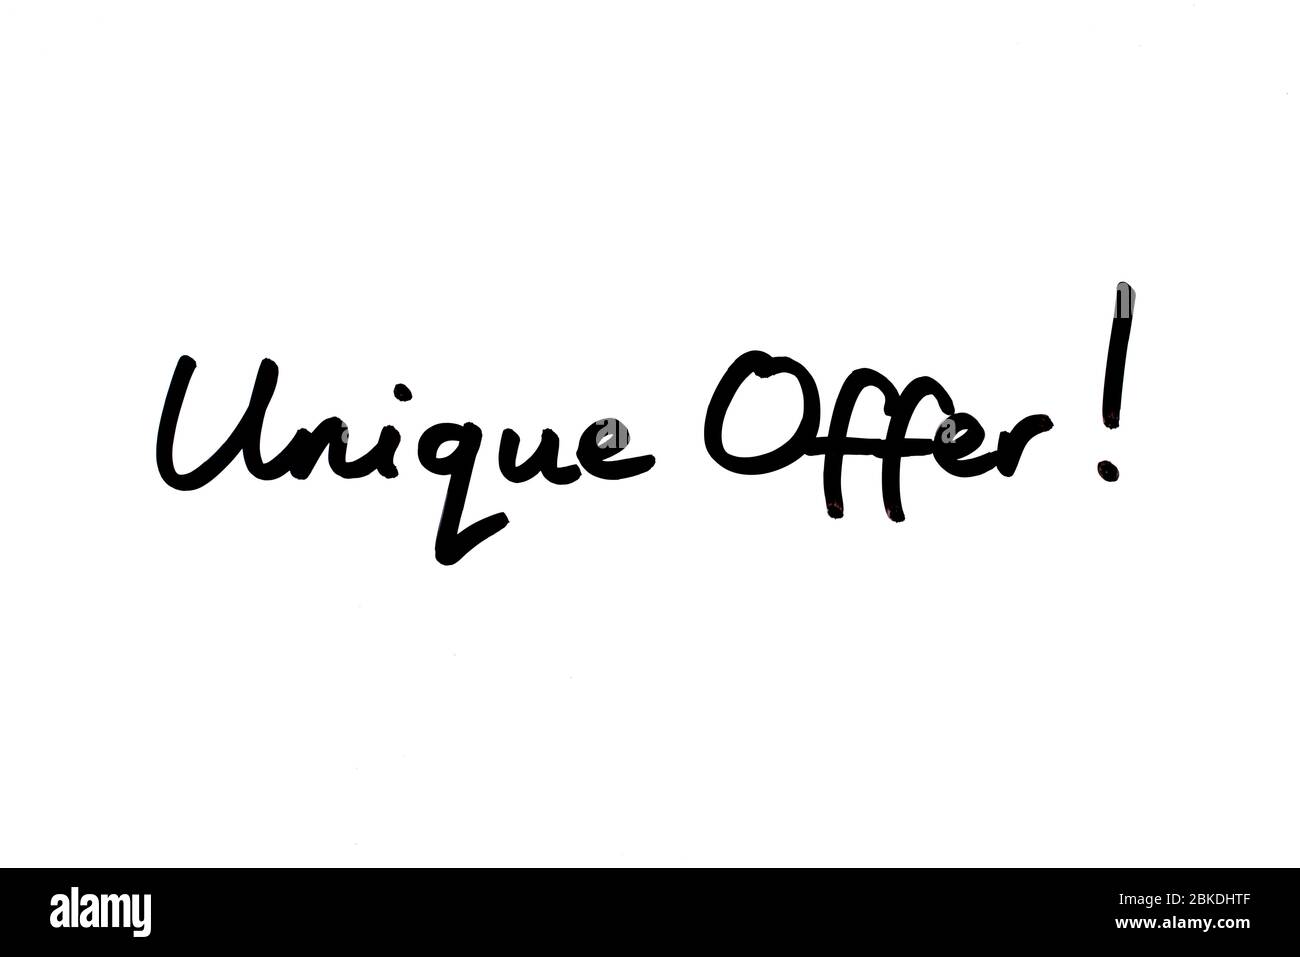 Exclusive Deals! handwritten on a white background Stock Photo - Alamy